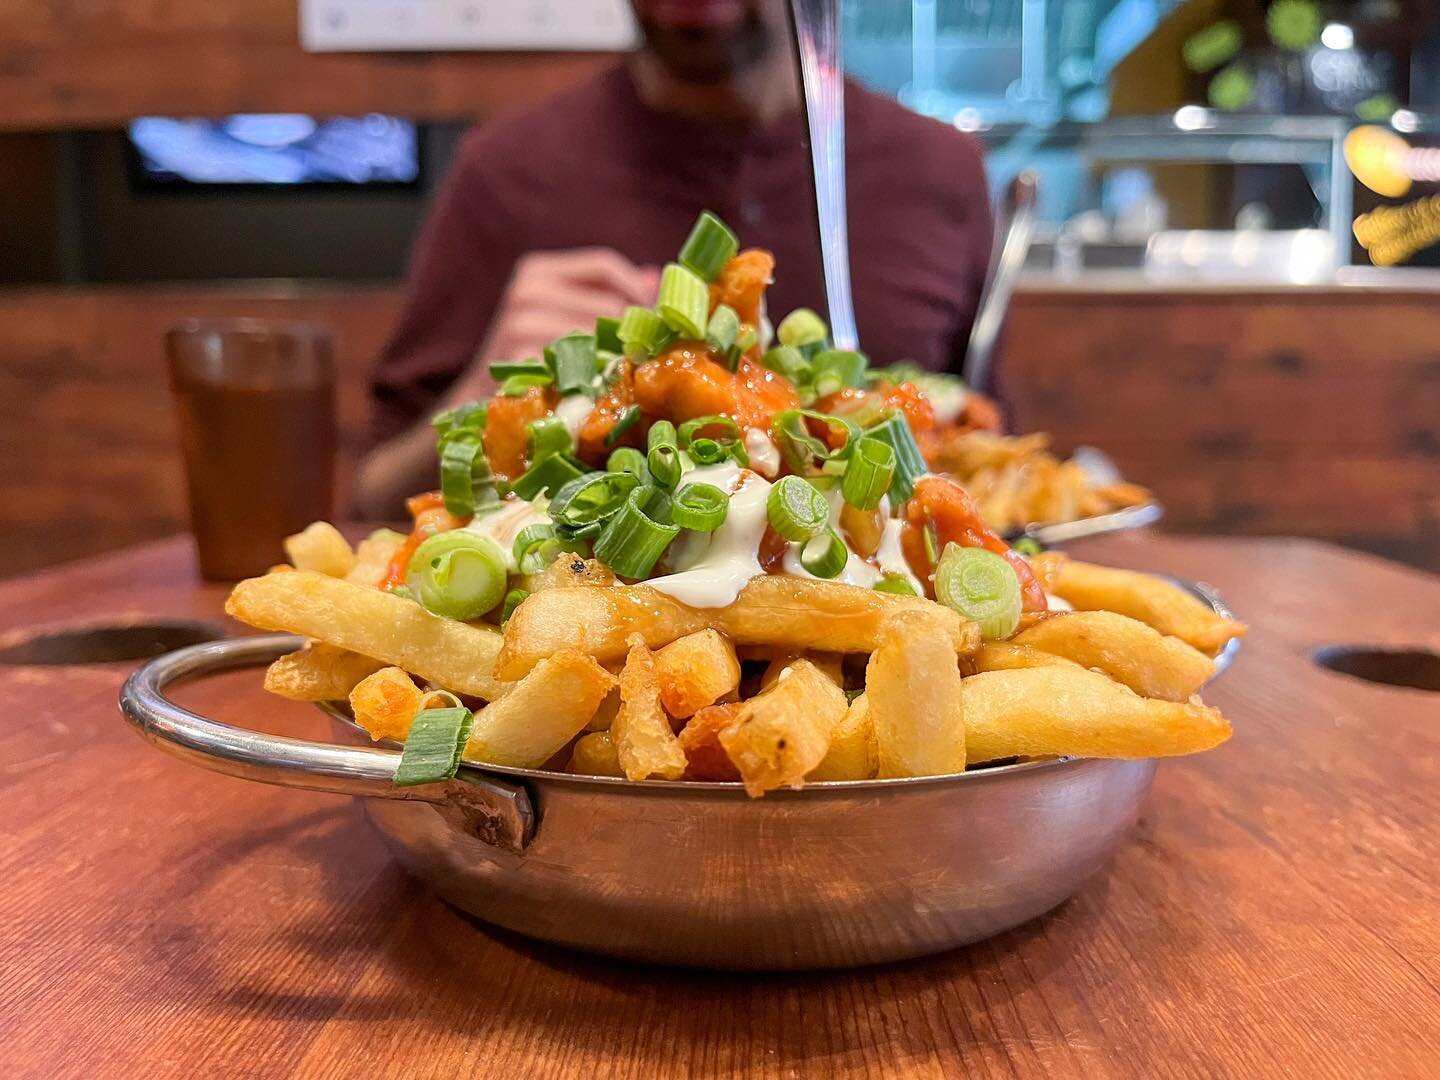 It&rsquo;s slowly becoming a tradition to stop at the Spud Shack for some poutine when we go up to Vancouver. 
#spudshackfryco #poutine #vancouver #vancouverbc #canada #foodtravel